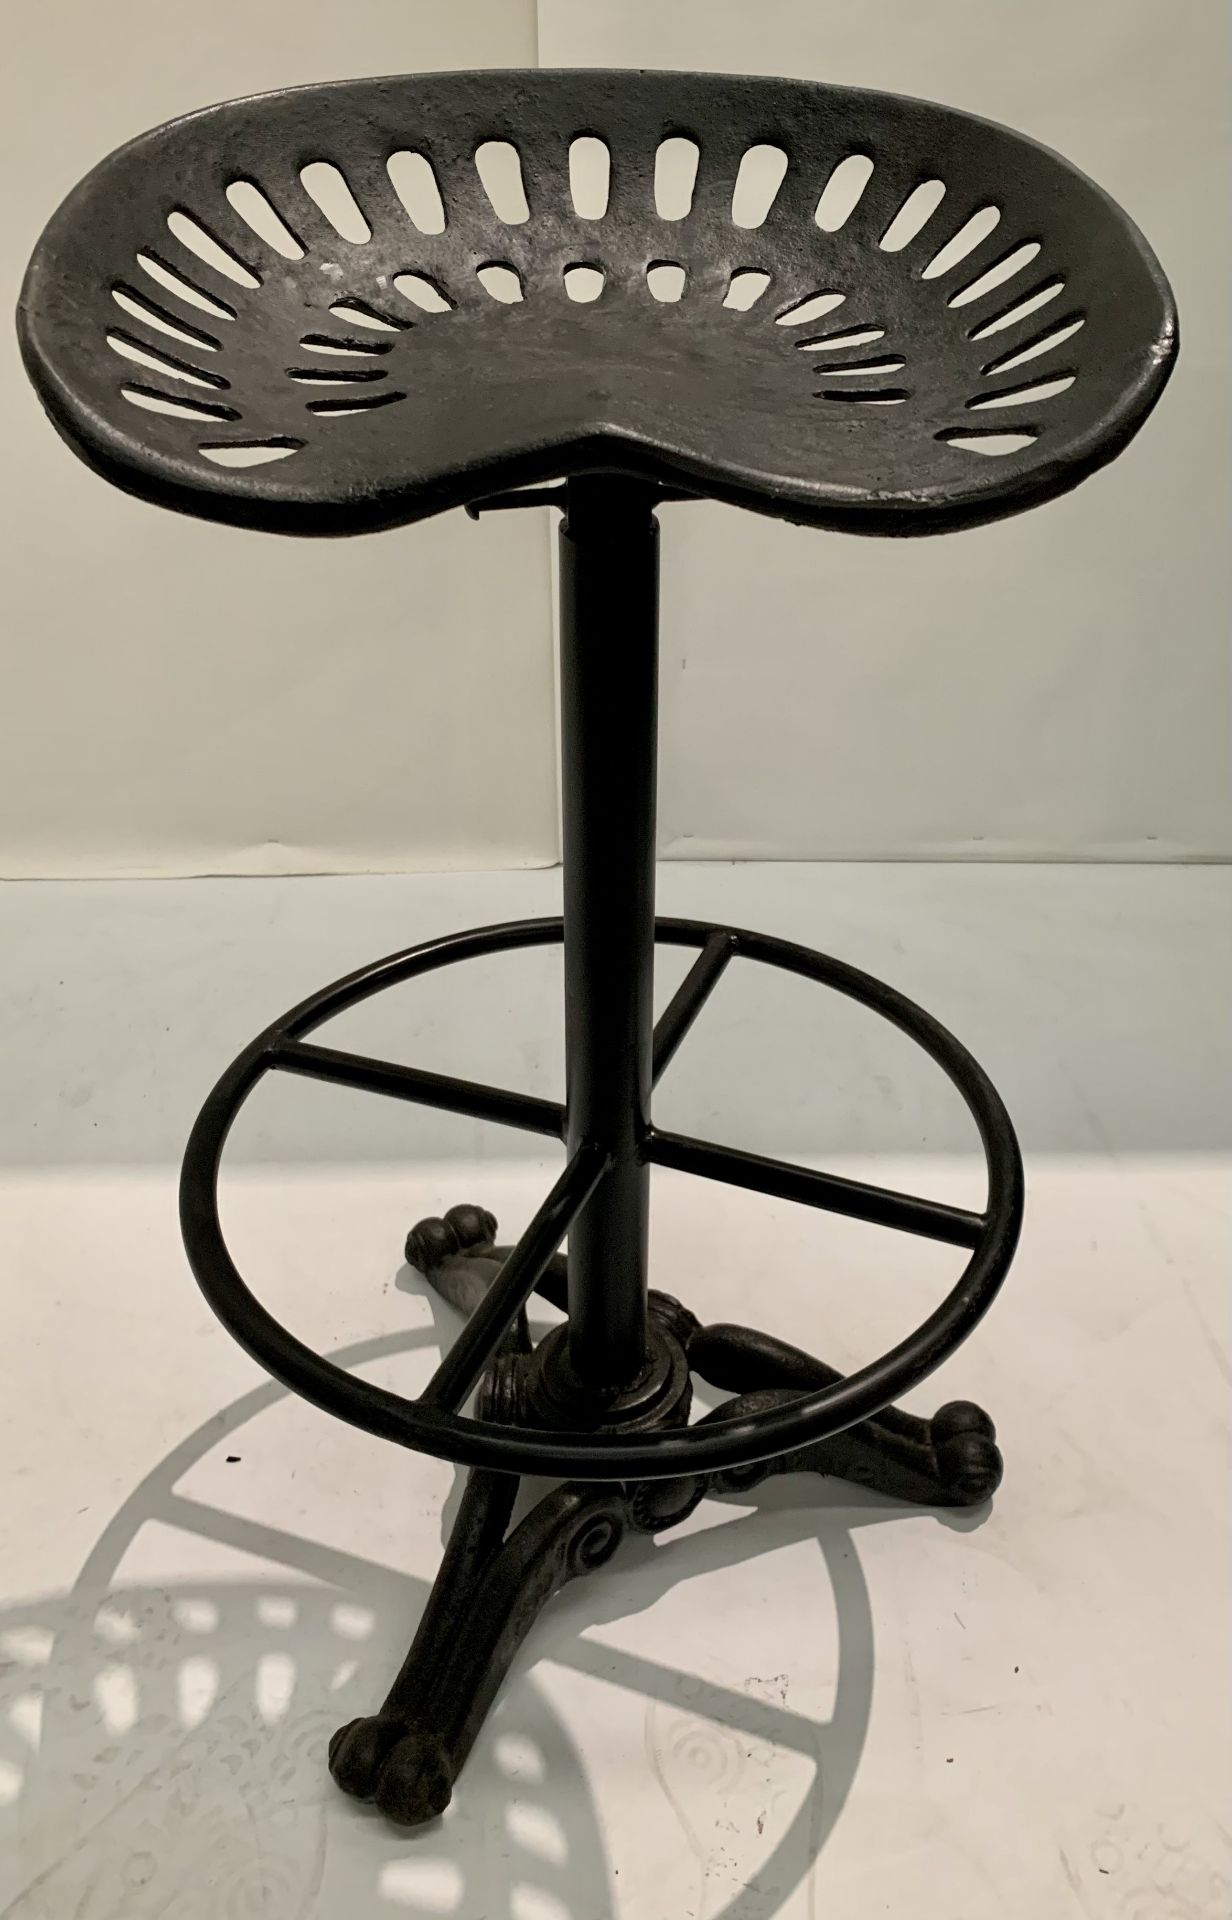 1 x heavy wrought iron adjustable bar stool with foot rest on trefoil base - adjustable height